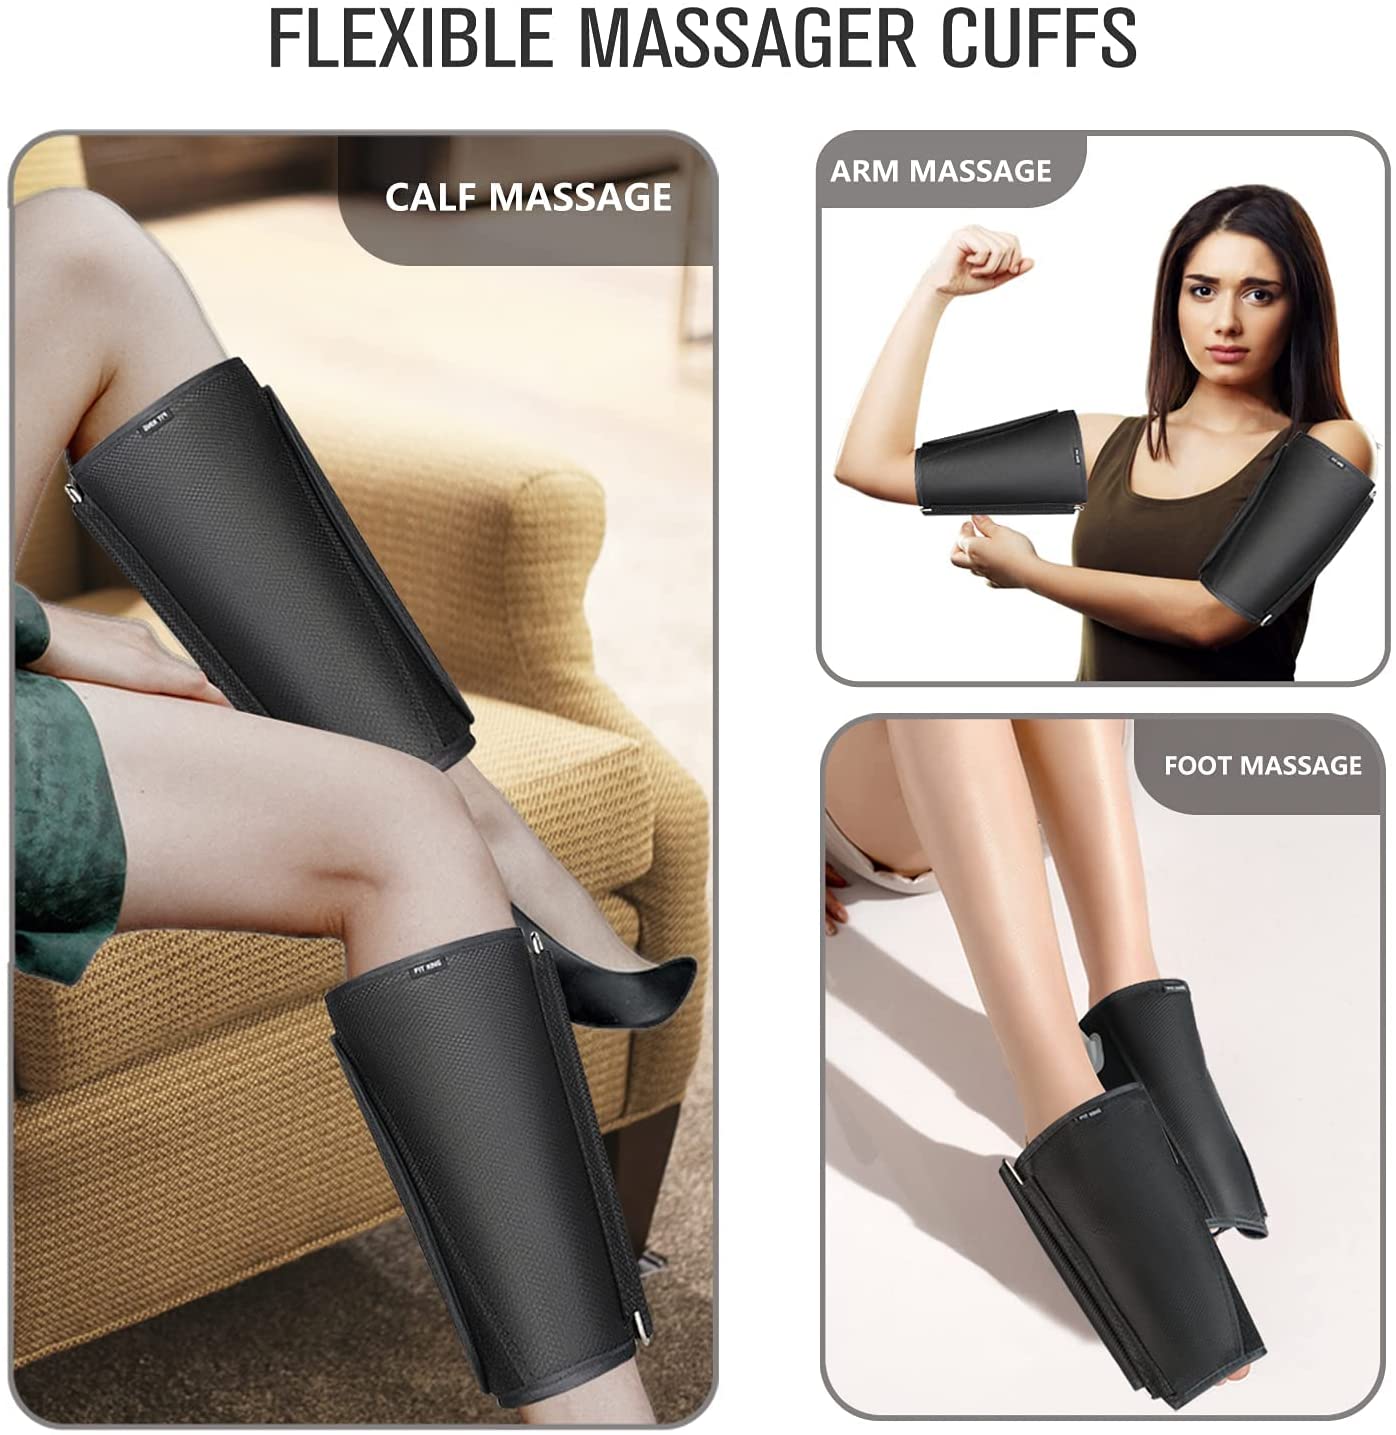 FIT KING Leg Massager with Heat for Circulation Algeria